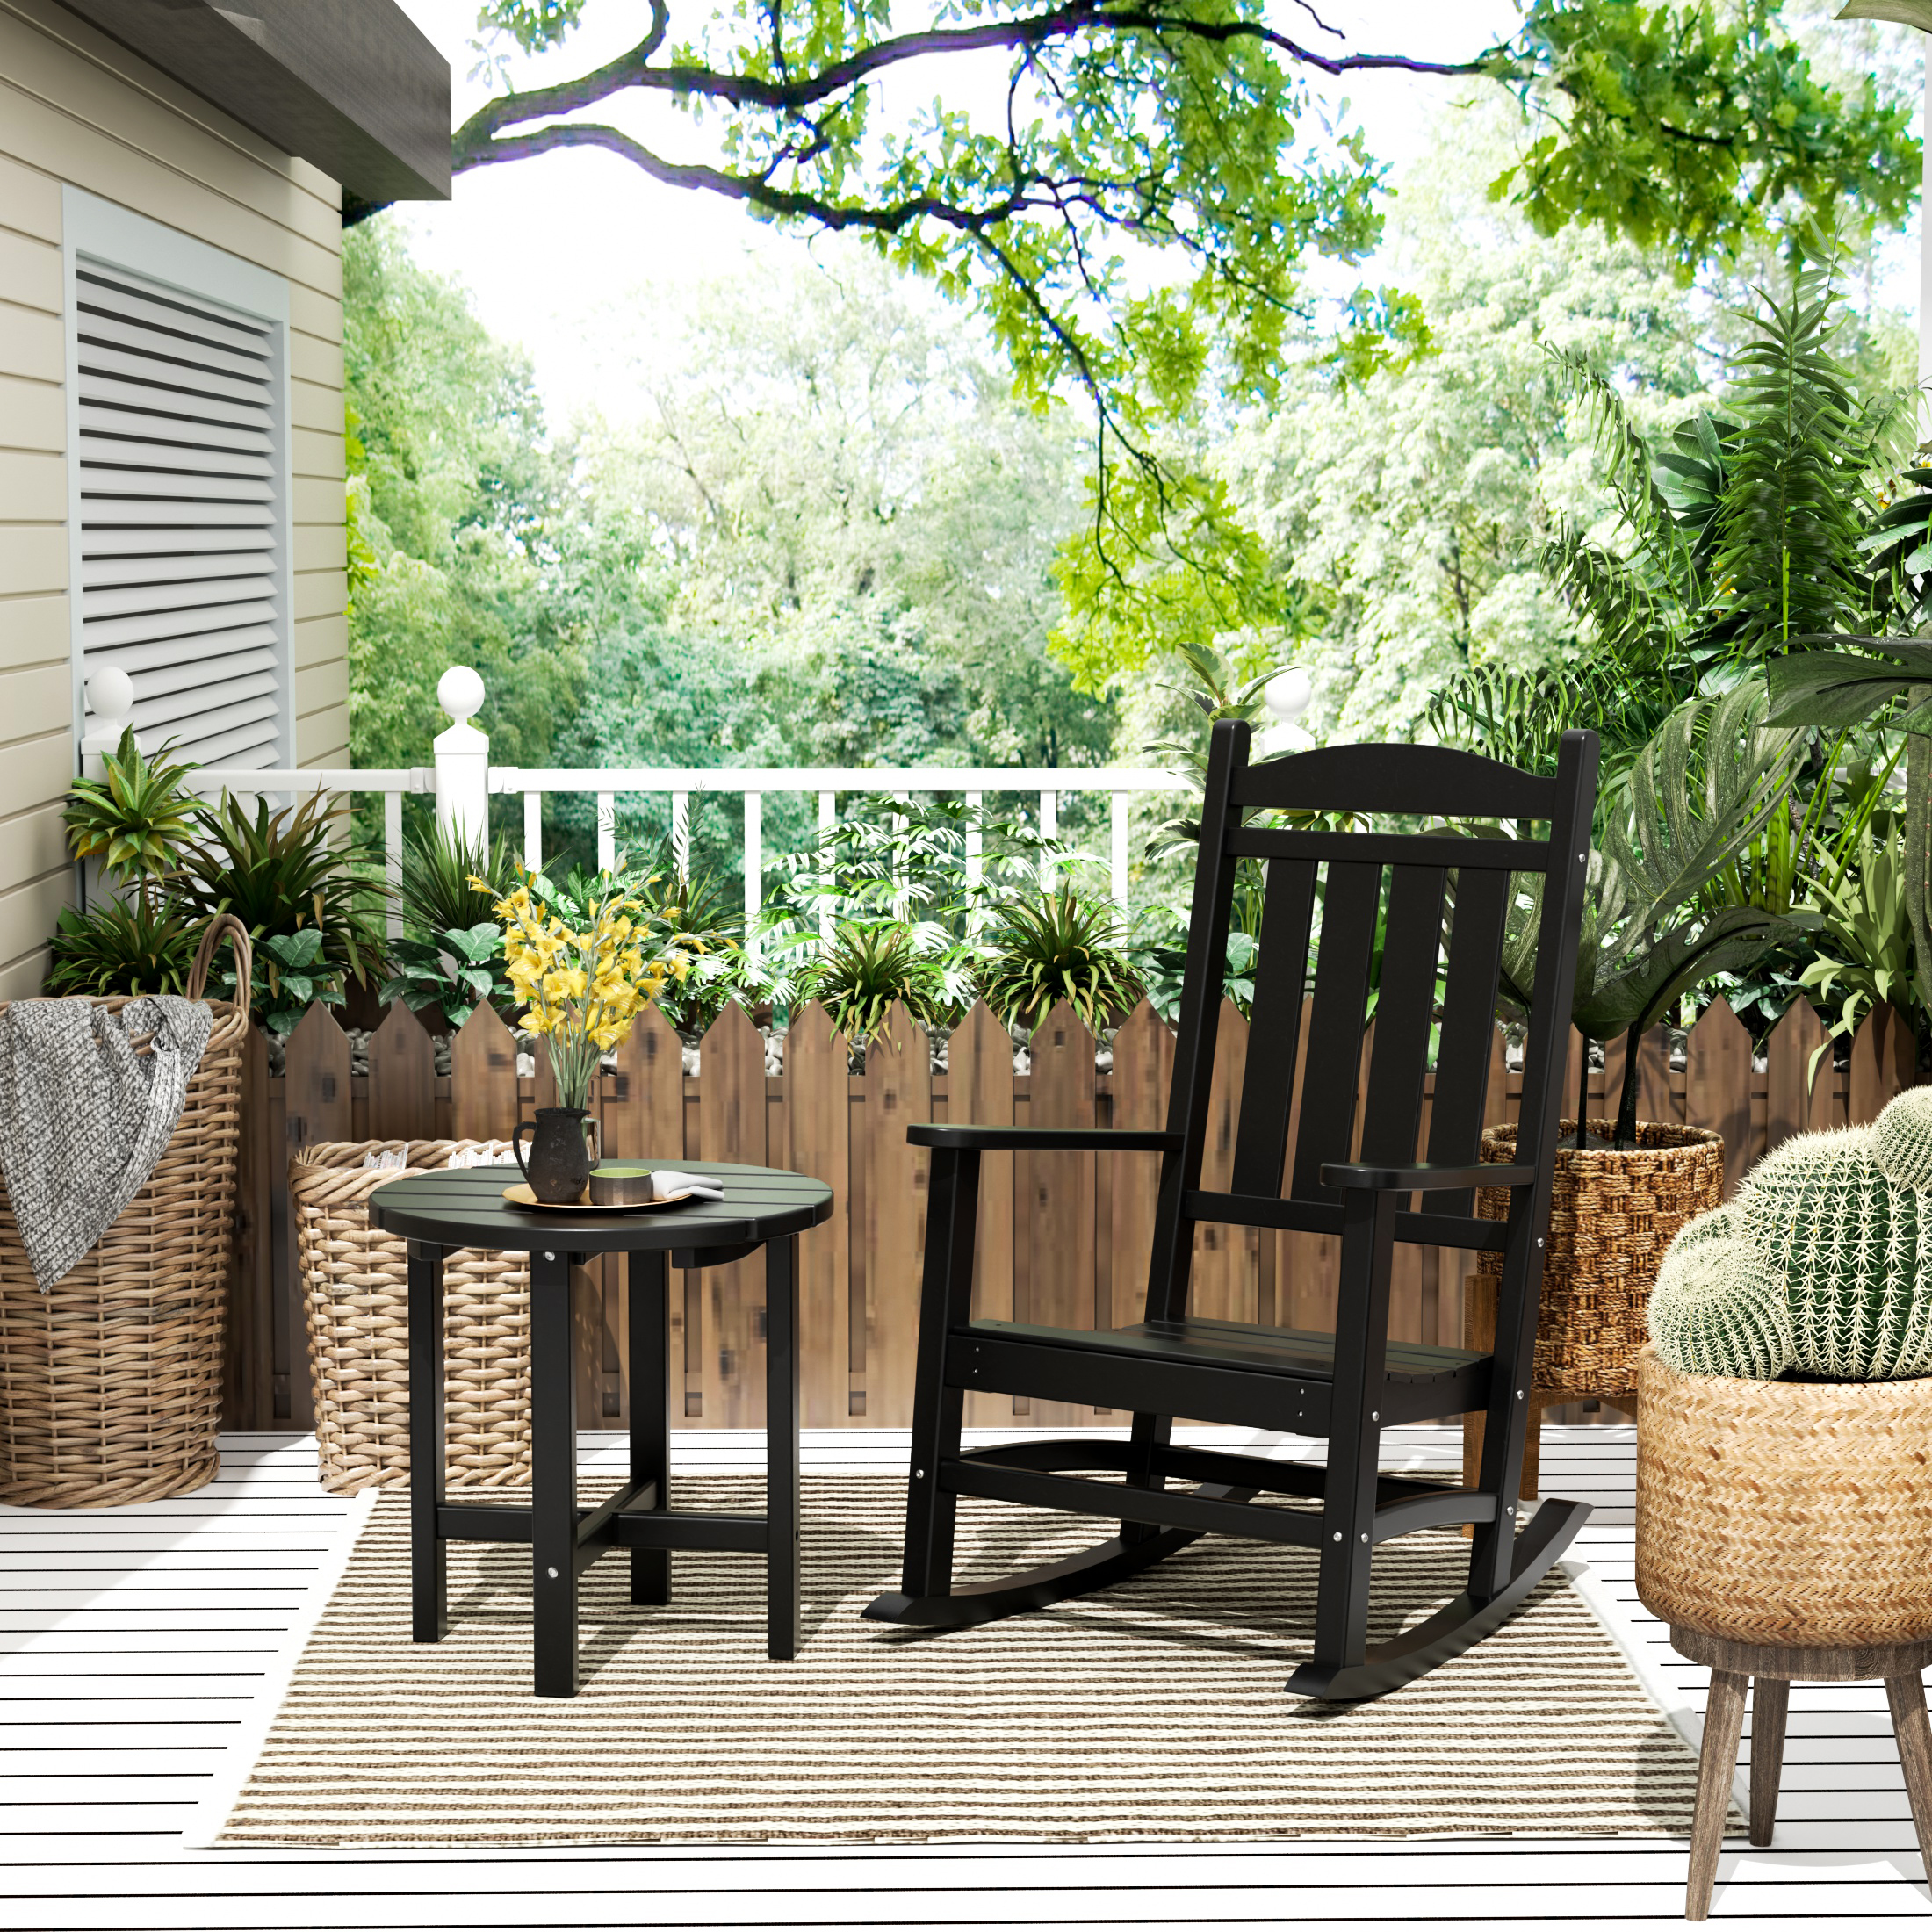 GARDEN 2-Piece Set Classic Plastic Porch Rocking Chair with Round Side Table Included, Black - image 1 of 7